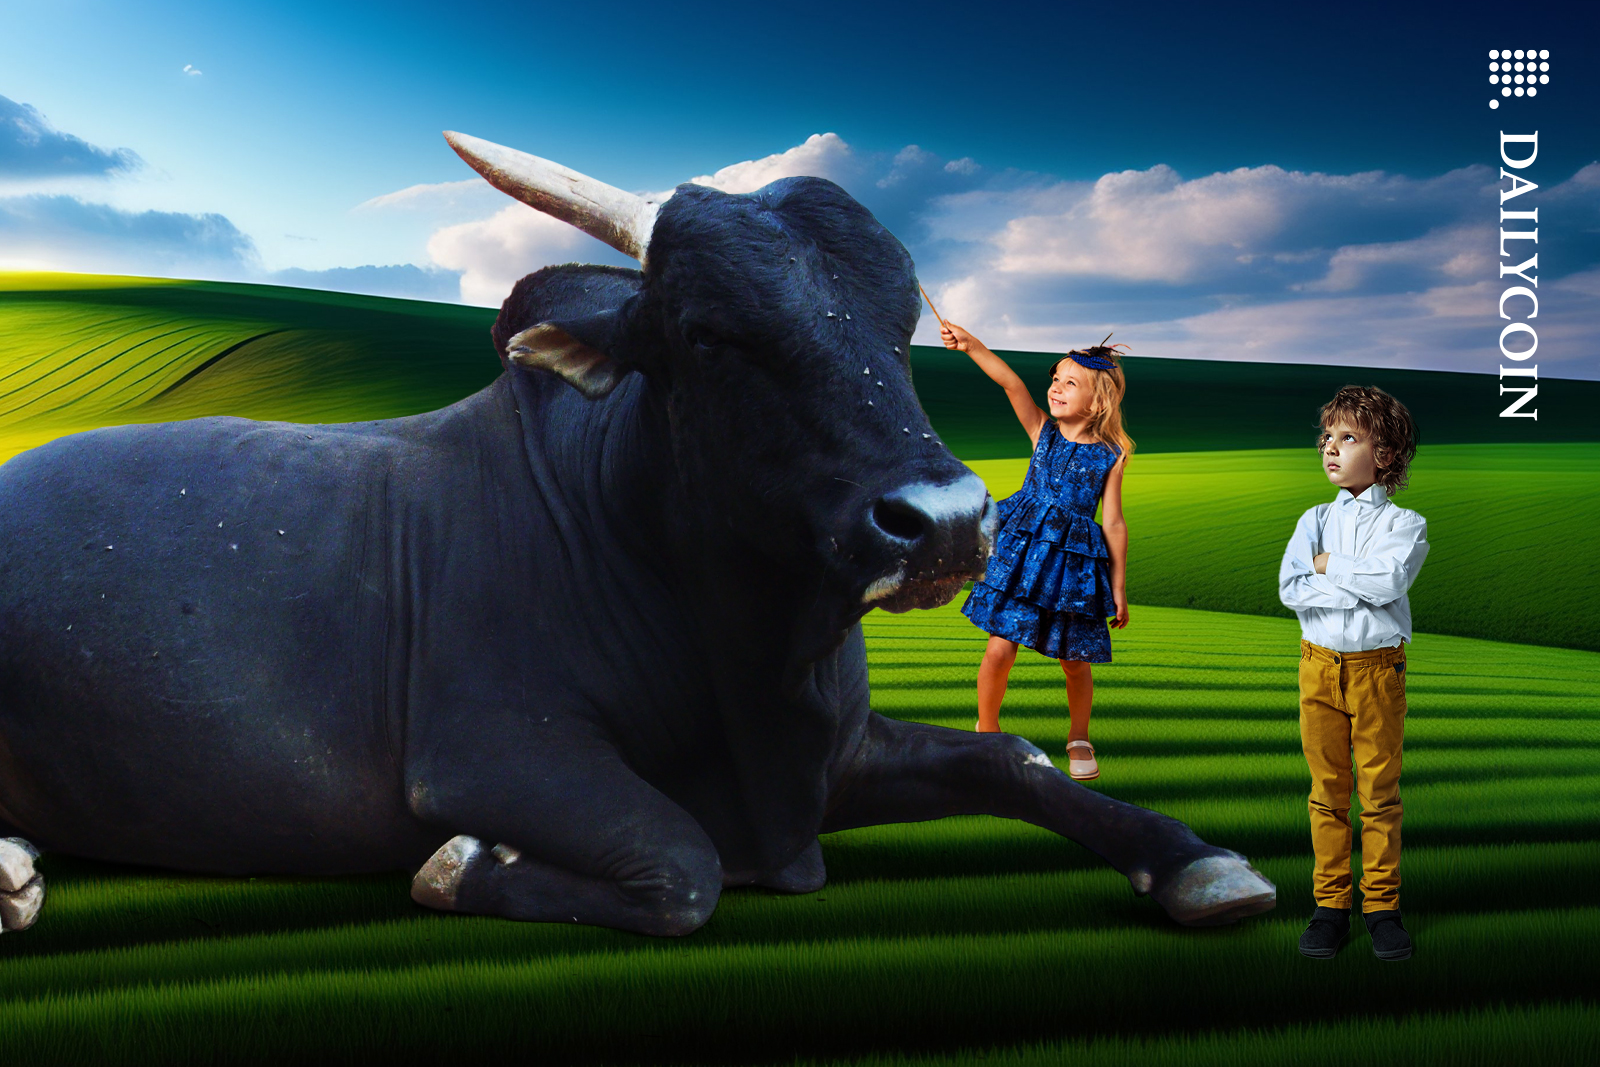 Bull is laying down on the grass, little boy is dissapointed and a little girl is trying to poke the bull to move him.